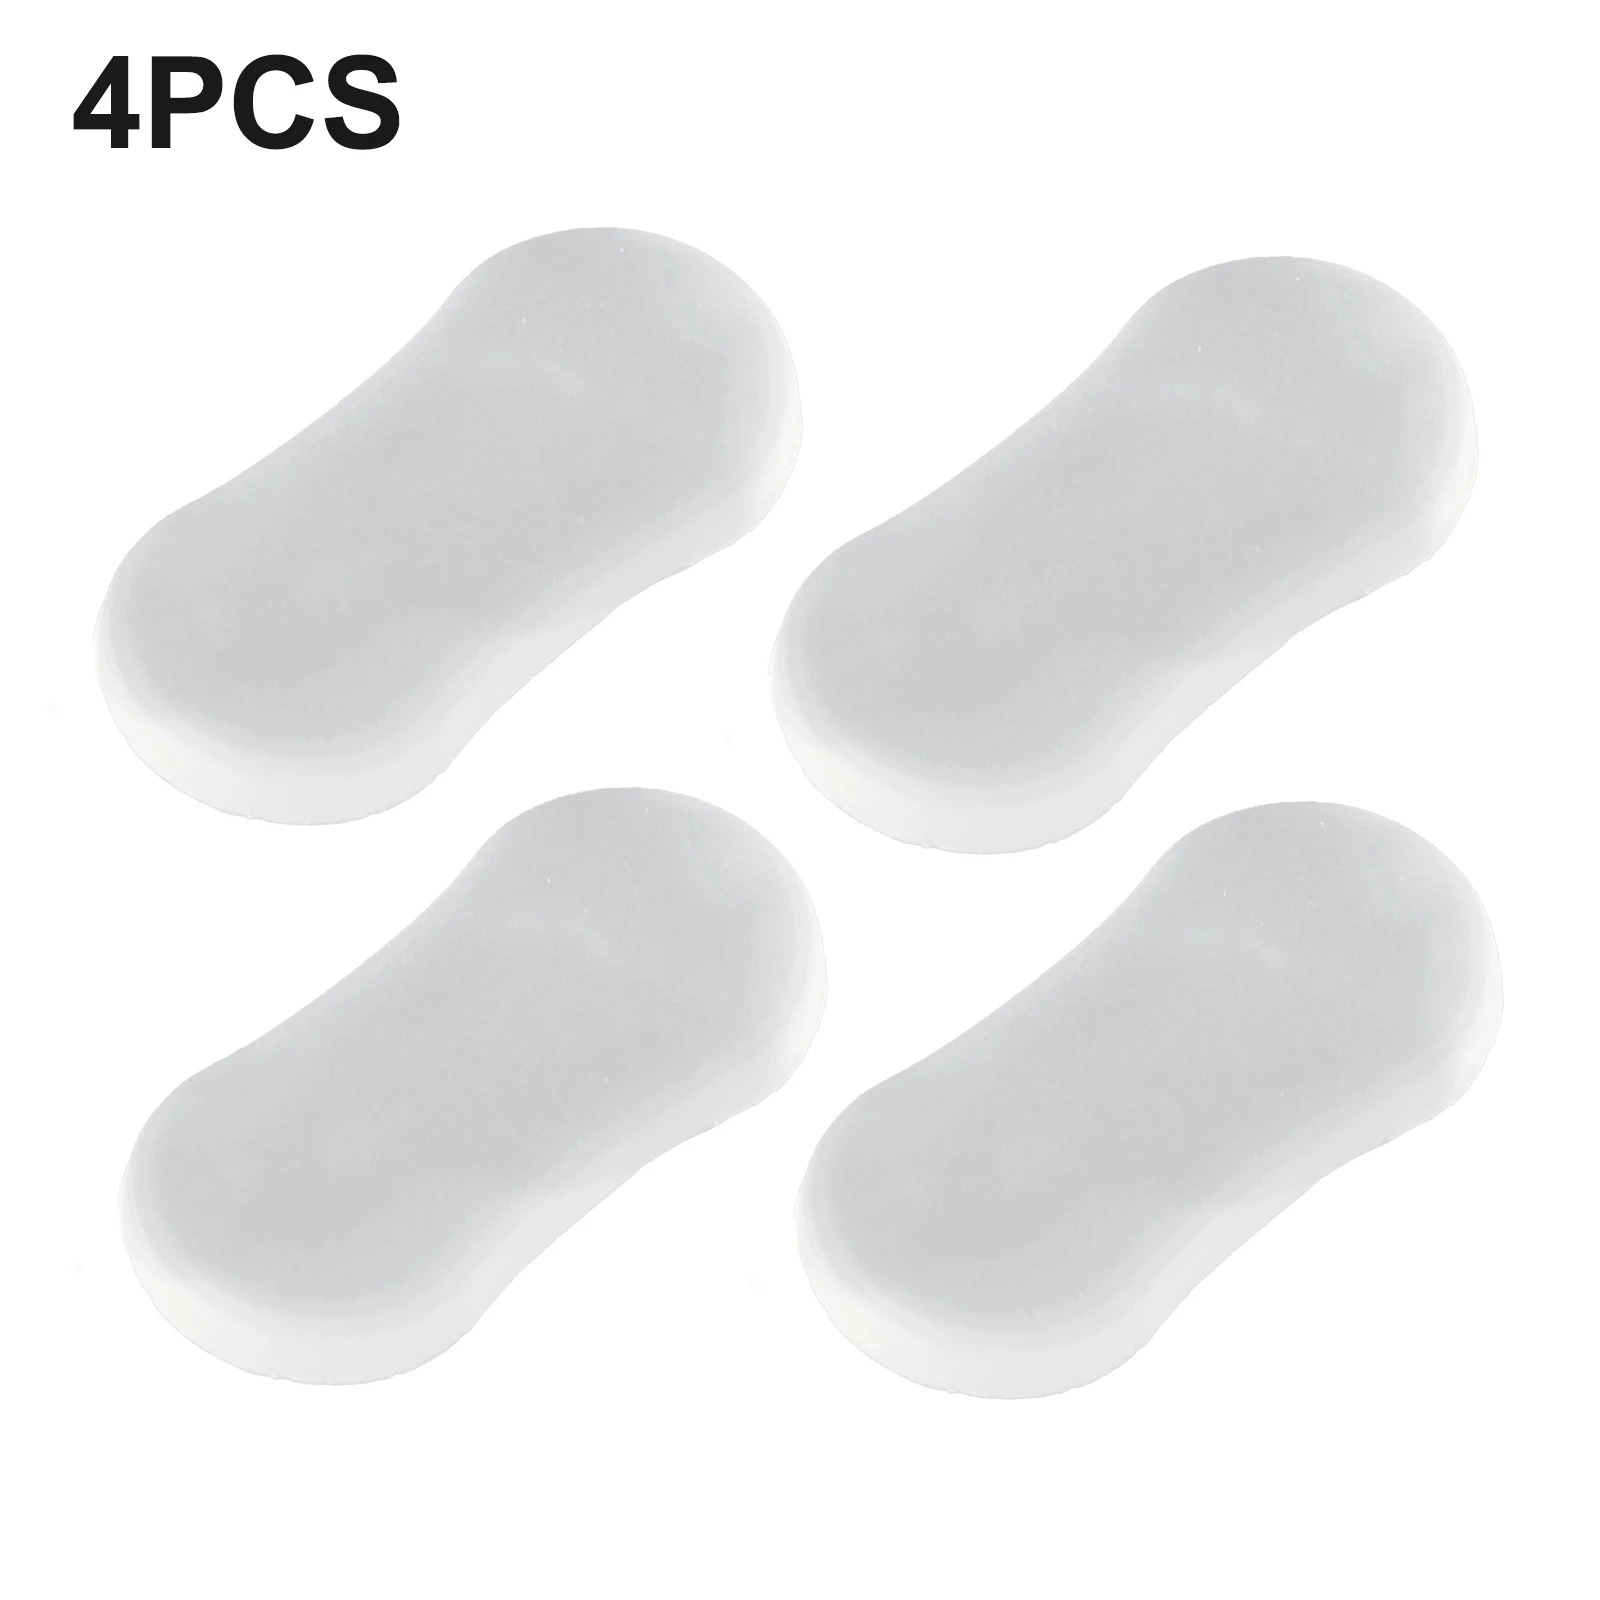 4pcs Toilet Seat Lid Bumpers Buffers Spacers Universal Bathroom Hardware White Toilet Seat Buffers Bumpers Bathroom Accessories